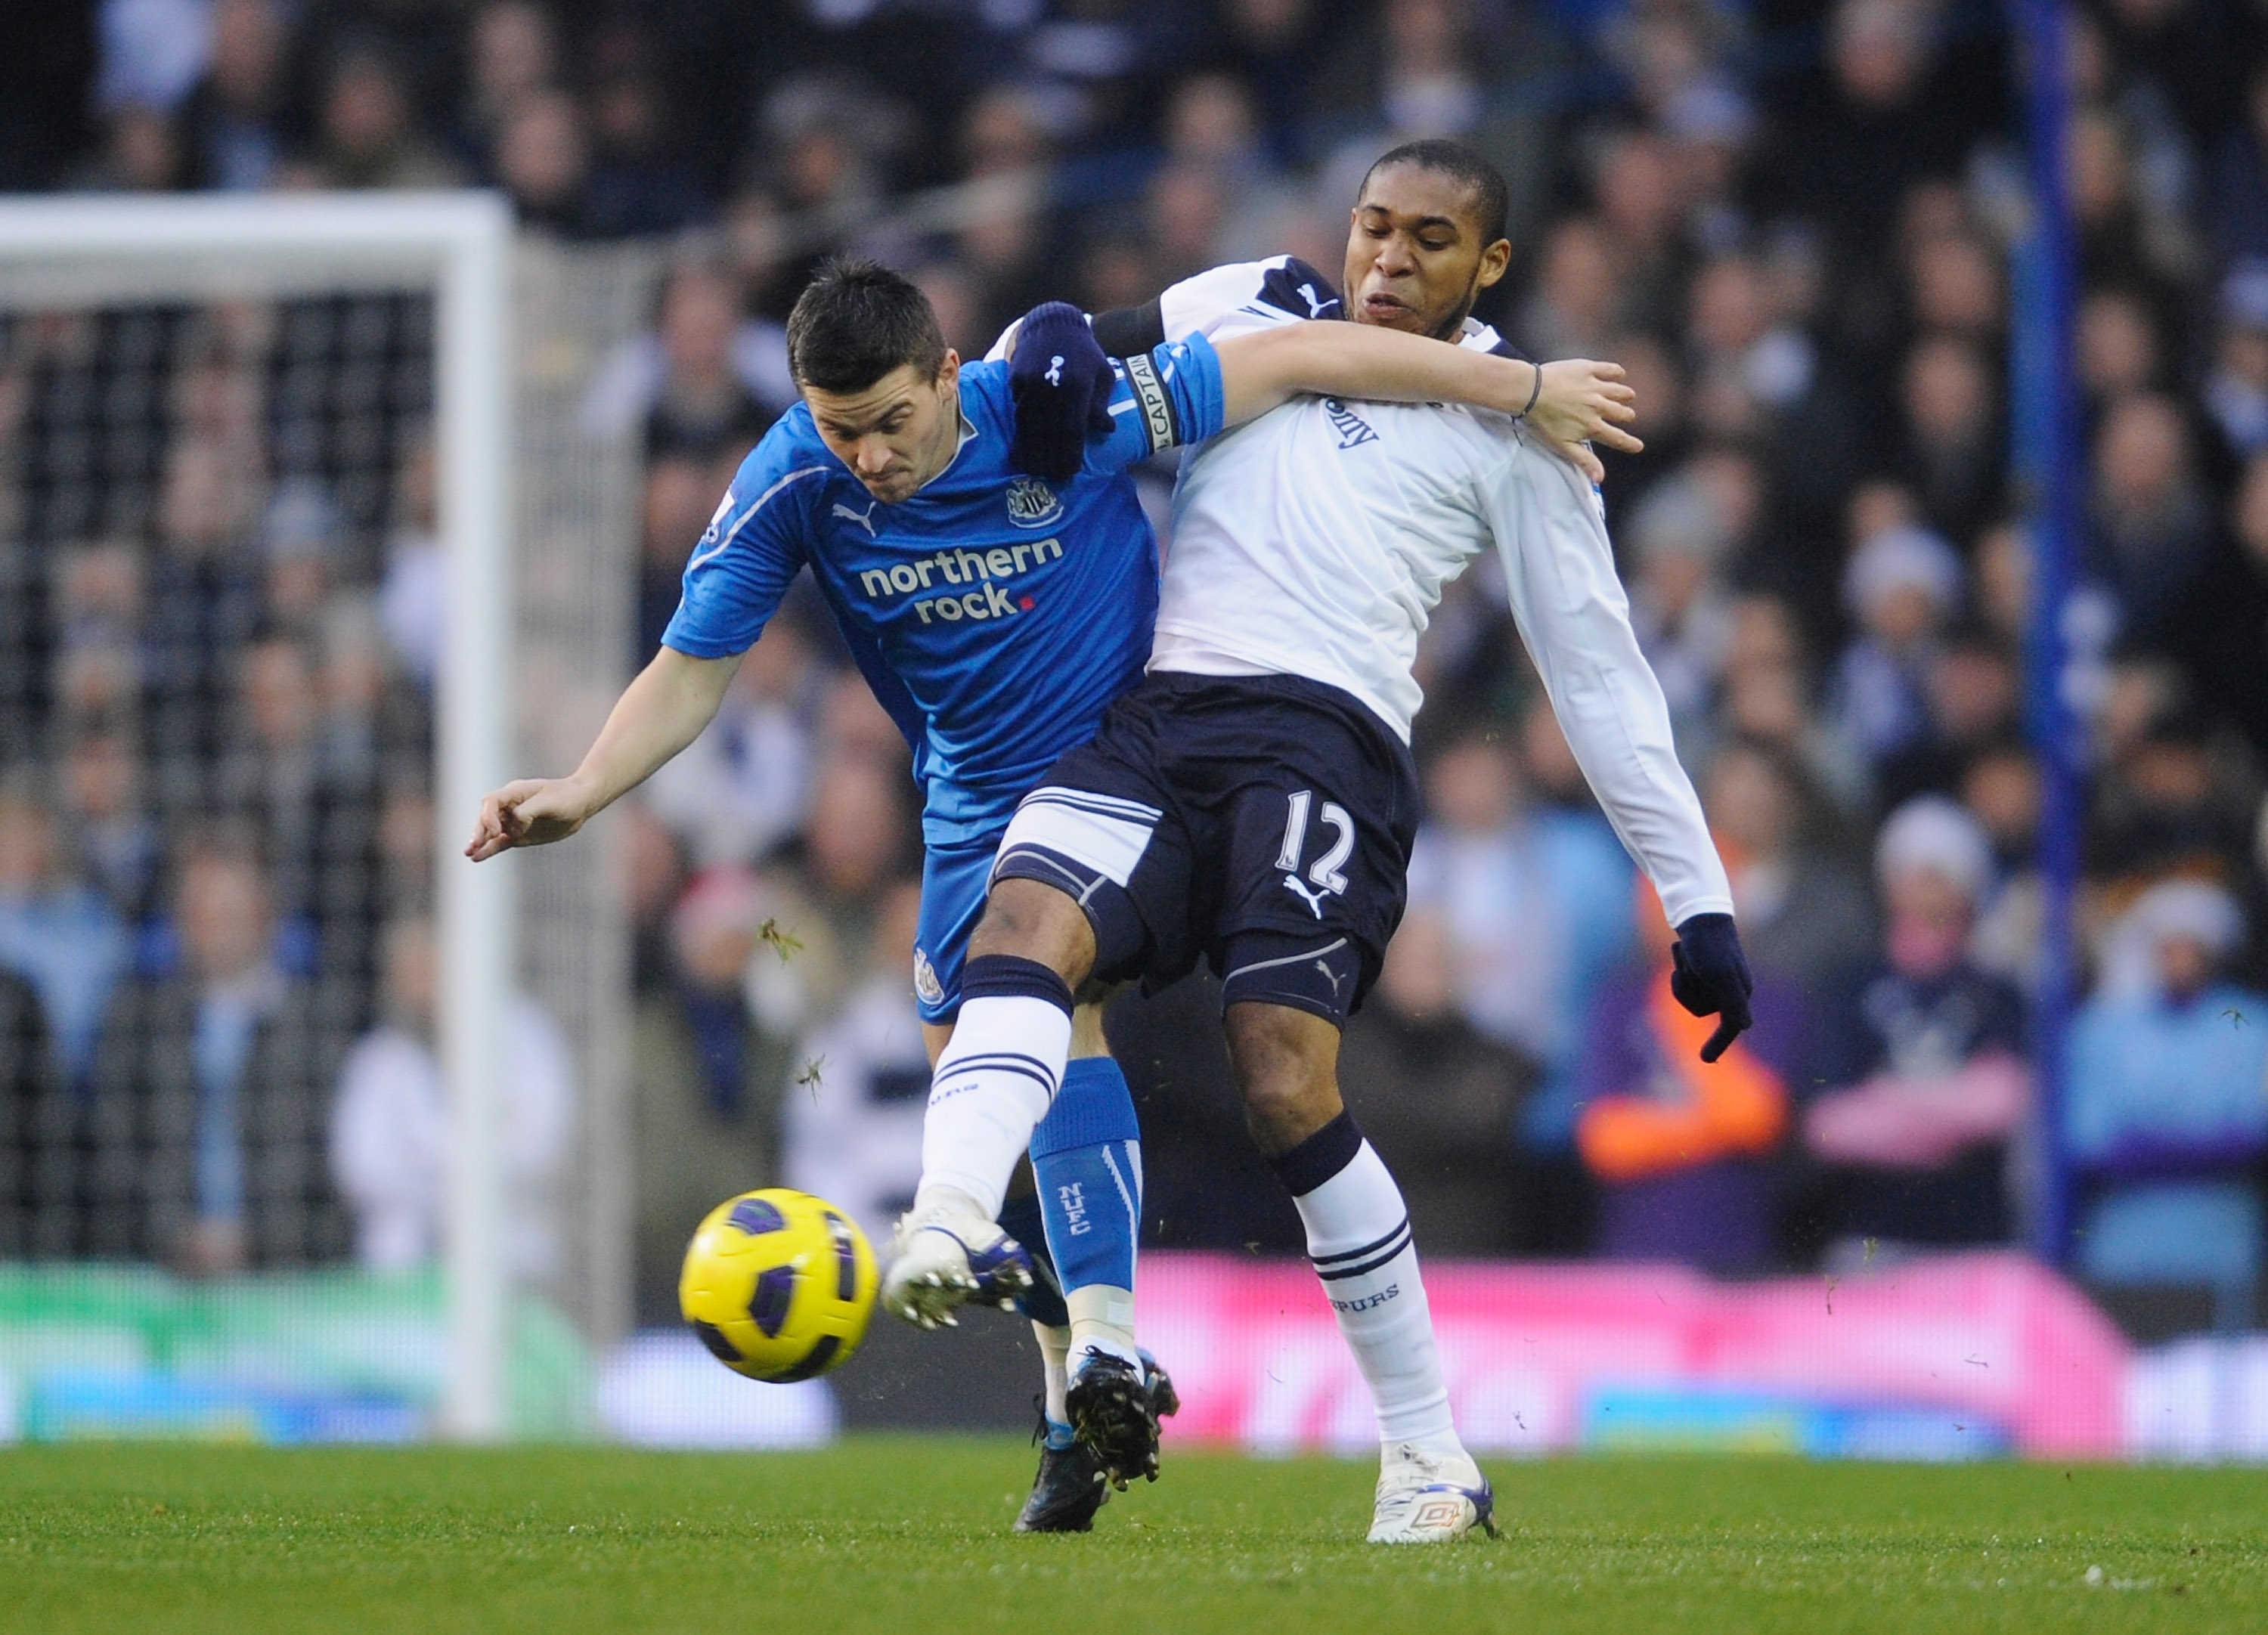 LONDON, ENGLAND - DECEMBER 28: Wilson Palacios of Tottenham Hotspur challenges Joey Barton of Newcastle United during the Barclays Premier League match between Tottenham Hotspur and Newcastle United at White Hart Lane on December 28, 2010 in London, Engla